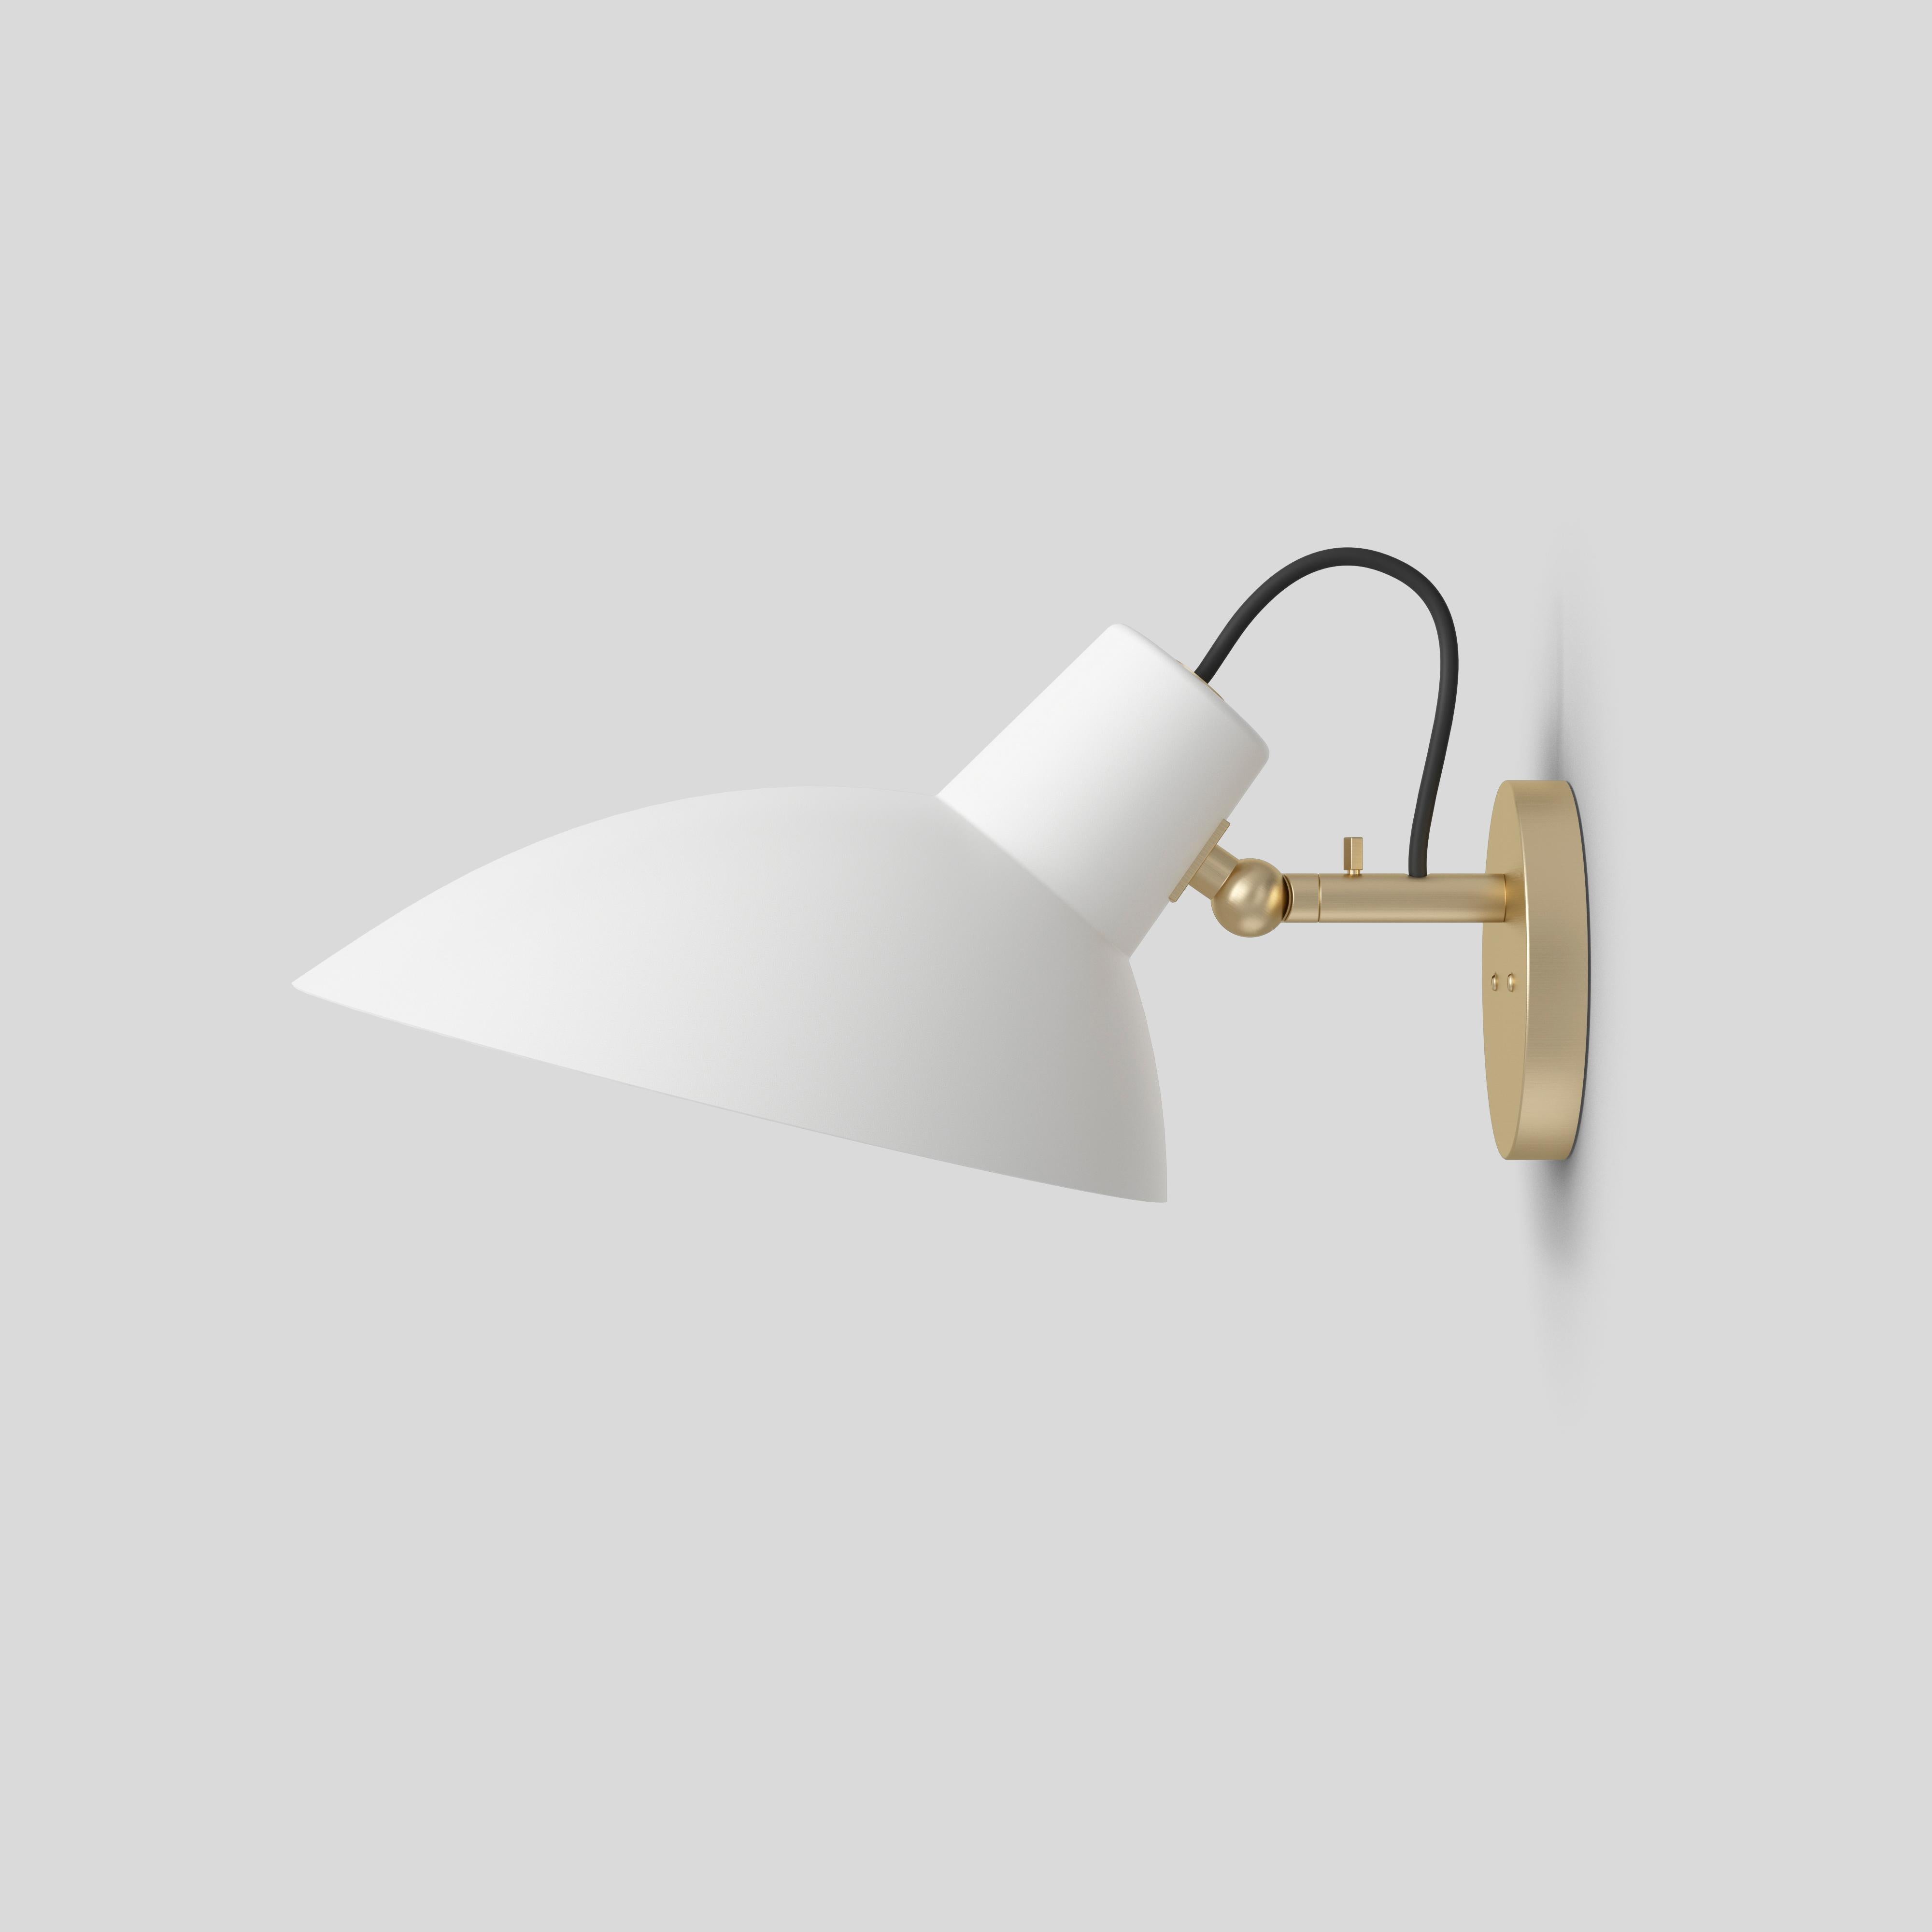 VV Cinquanta wall
Design by Vittoriano Viganò
This version is with white lacquered reflector and brass mount.

The VV Cinquanta features an elegant and versatile posable direct light source that can swivel and tilt. The Wall model is mounted on a